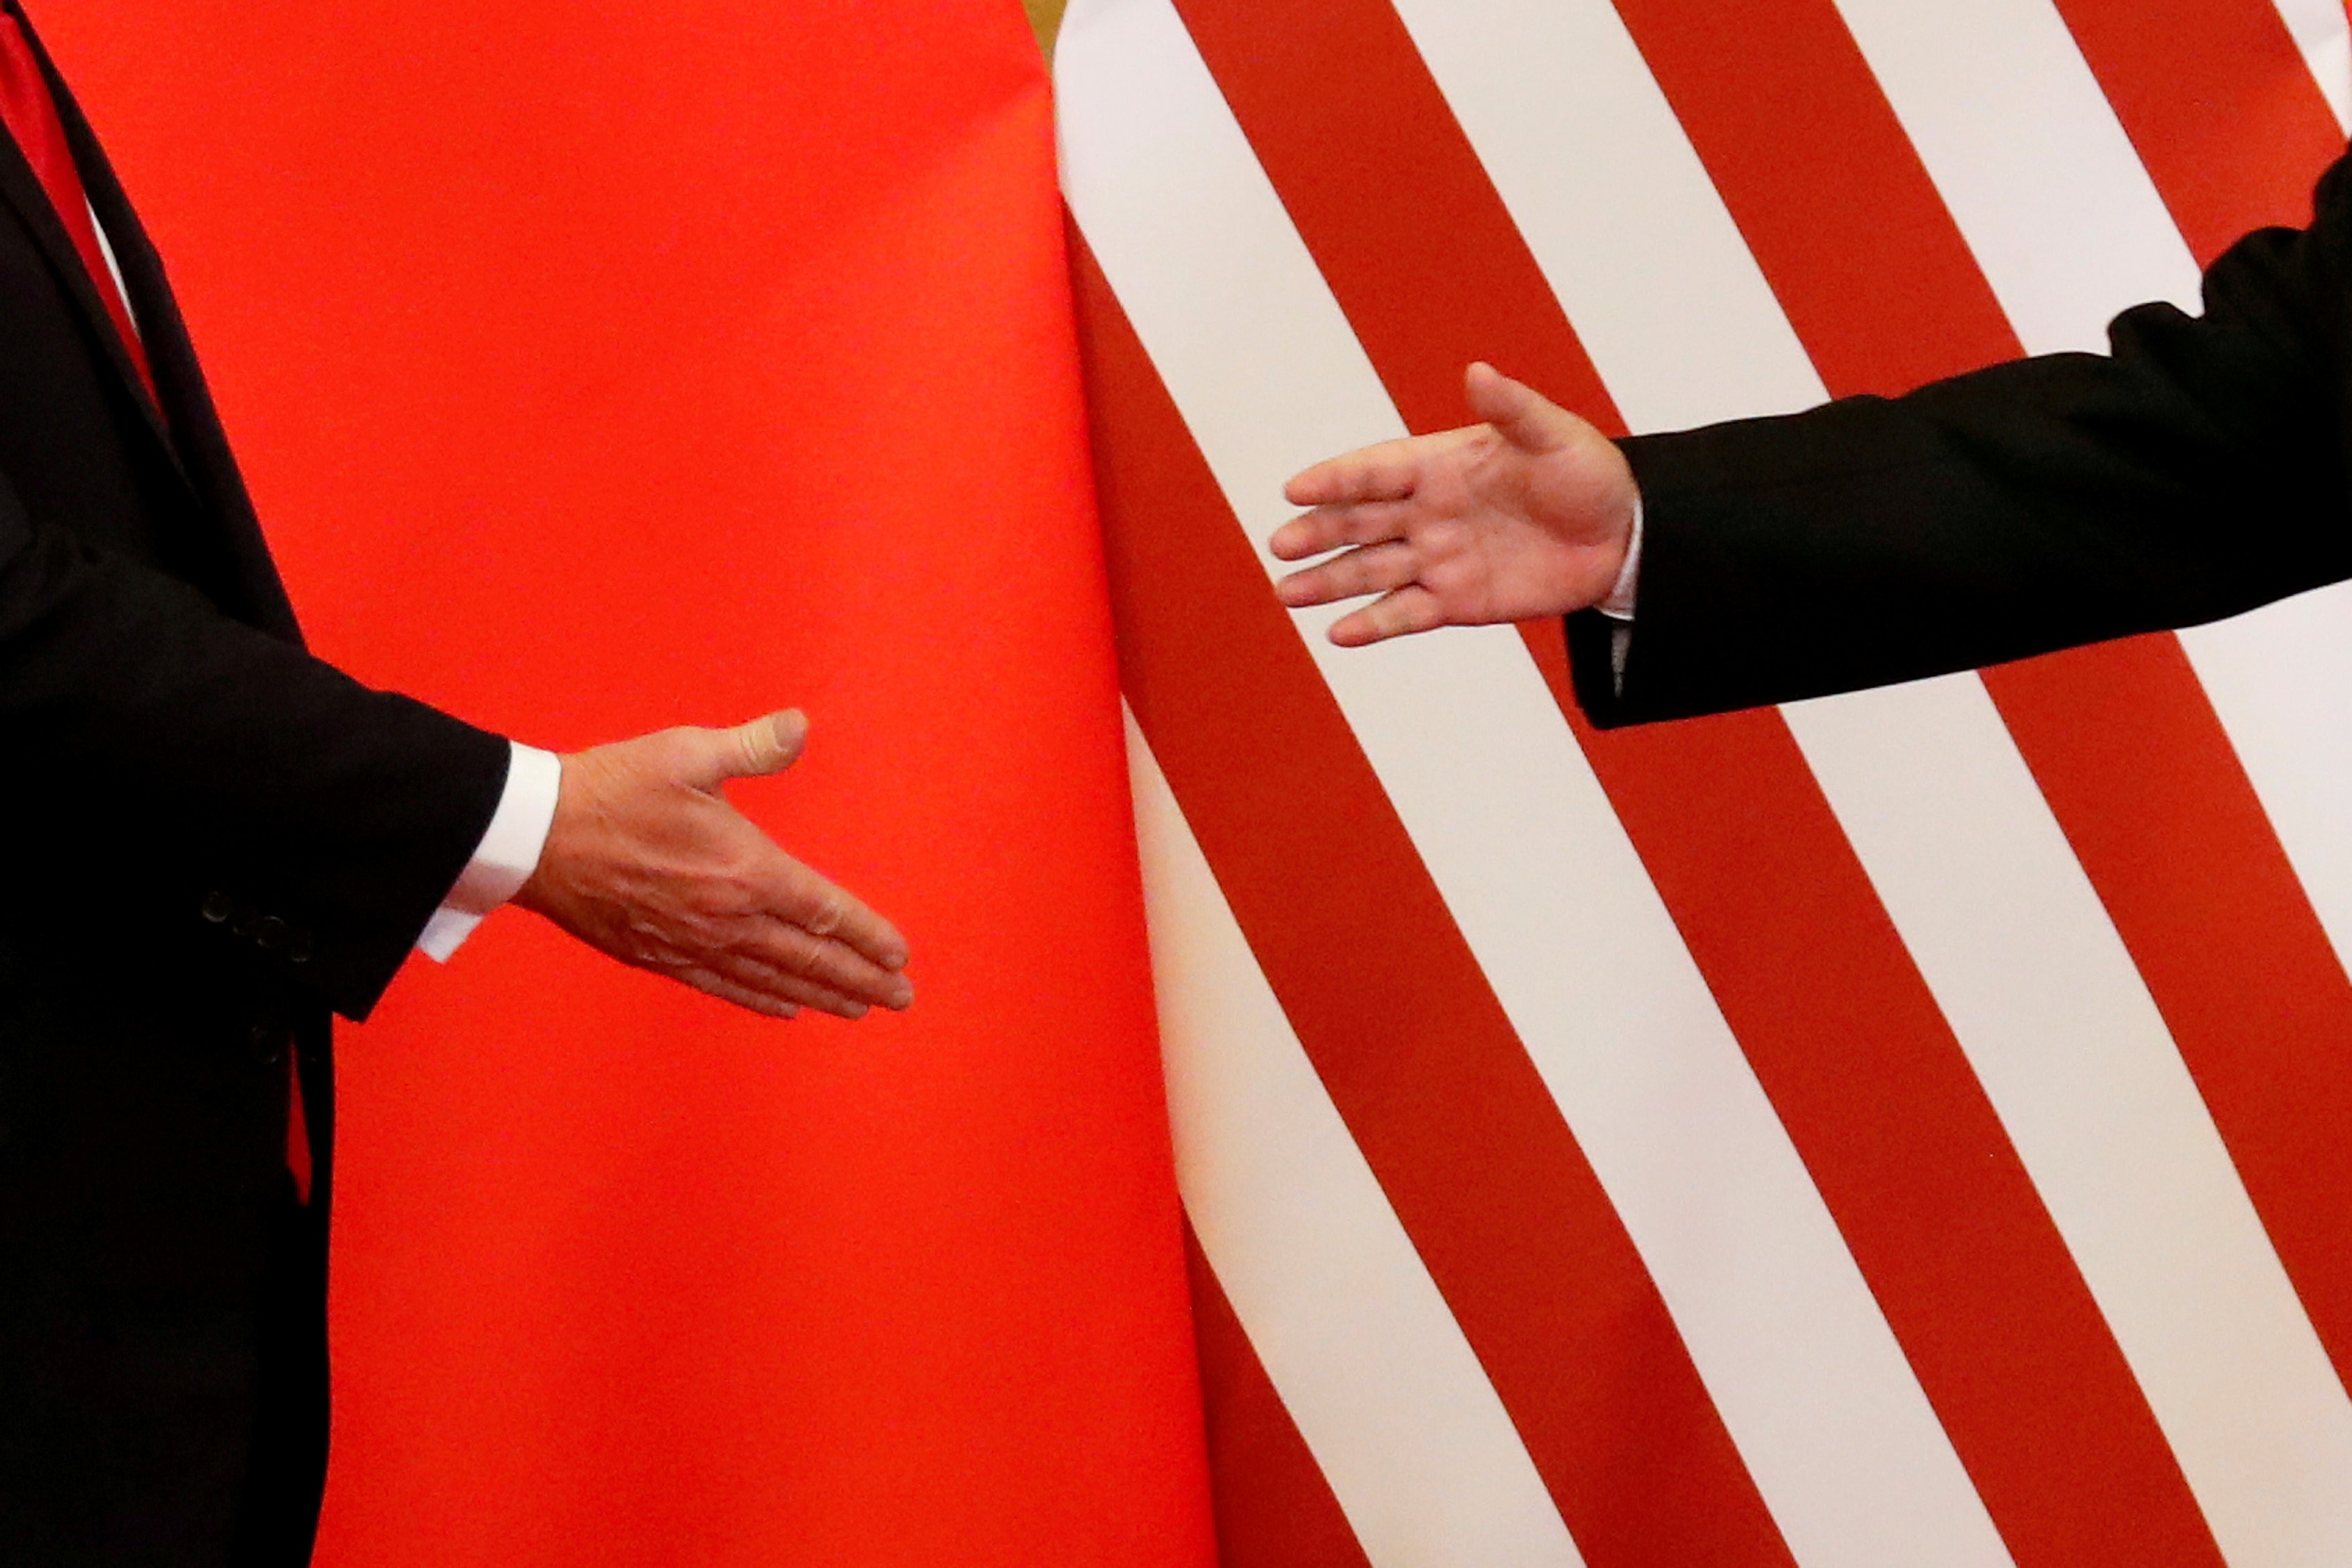 America’s military might means it remains the most powerful force in Asia – for now, but nervousness over the US president’s policies will speed China’s rise to the top spot, finds Lowy Institute in its first Asia Power Index